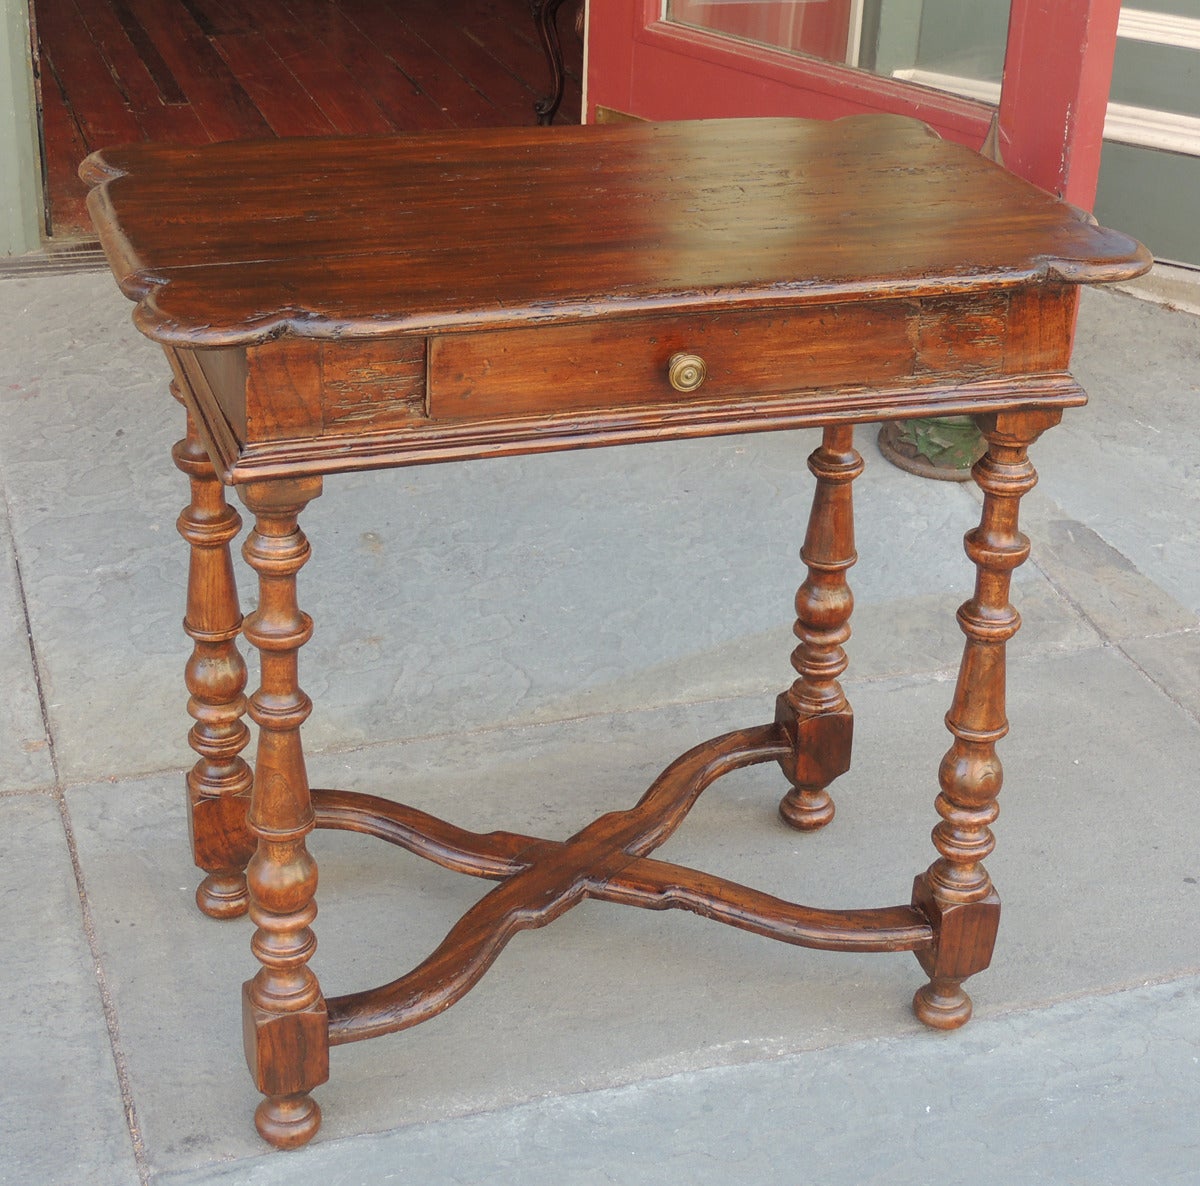 This table was made in Italy during the late 18th century and is constructed of pine. The table features a flat top with beveled borders and carved rounded corners above a single drawer. The table is supported by four hand-turned legs with